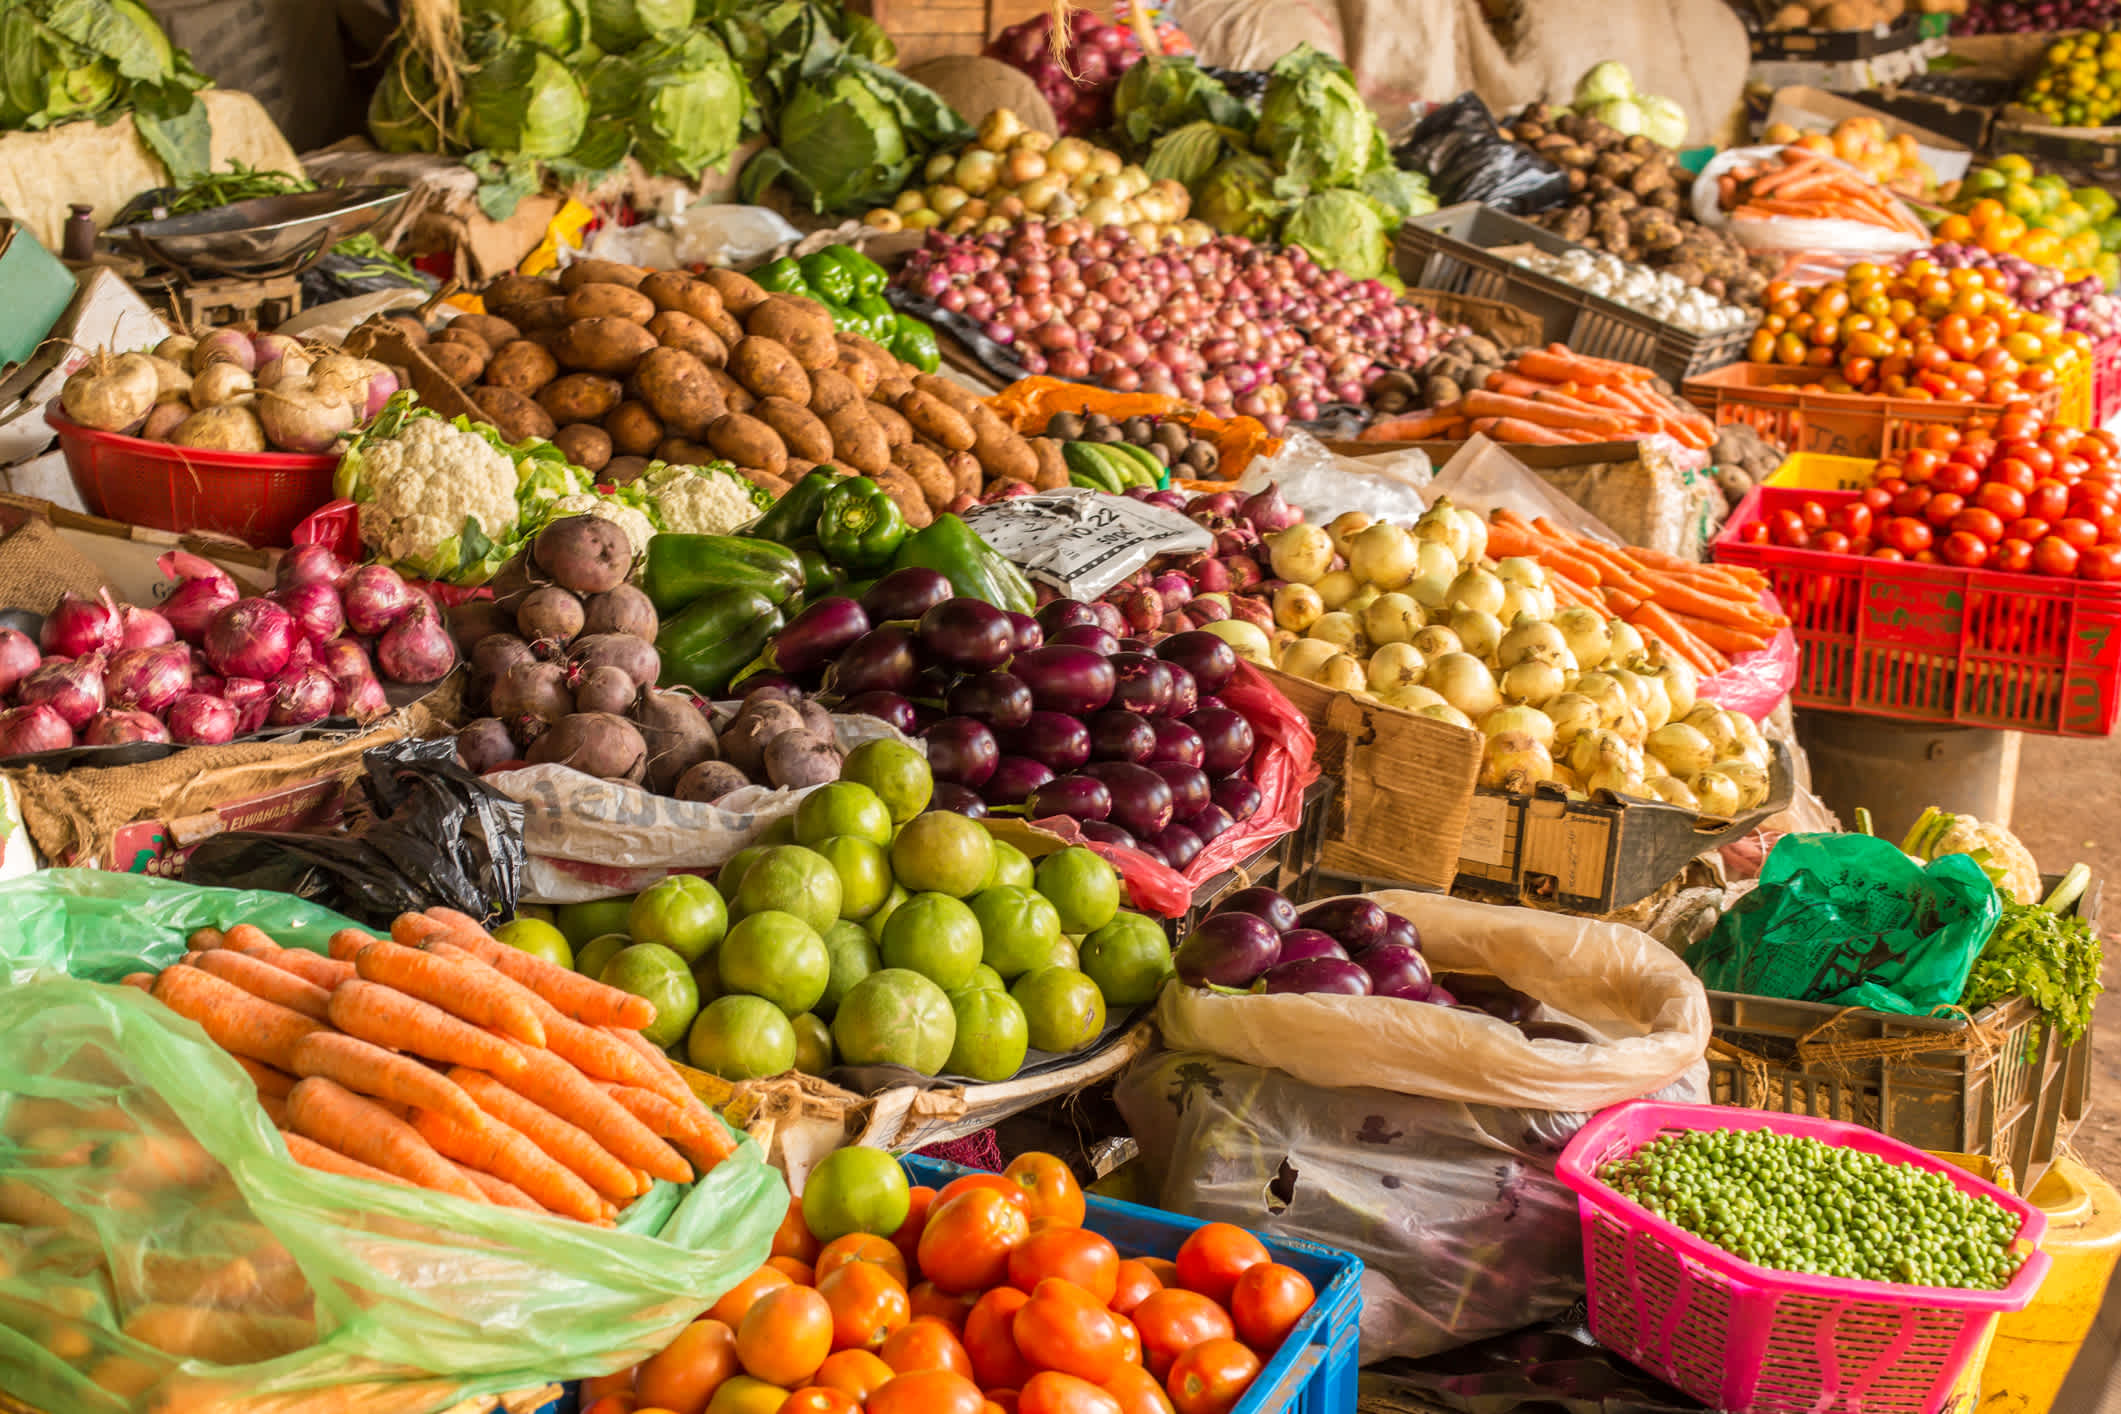 Fruits and vegetables at the street market in Nairobi, Kenya, Africa.